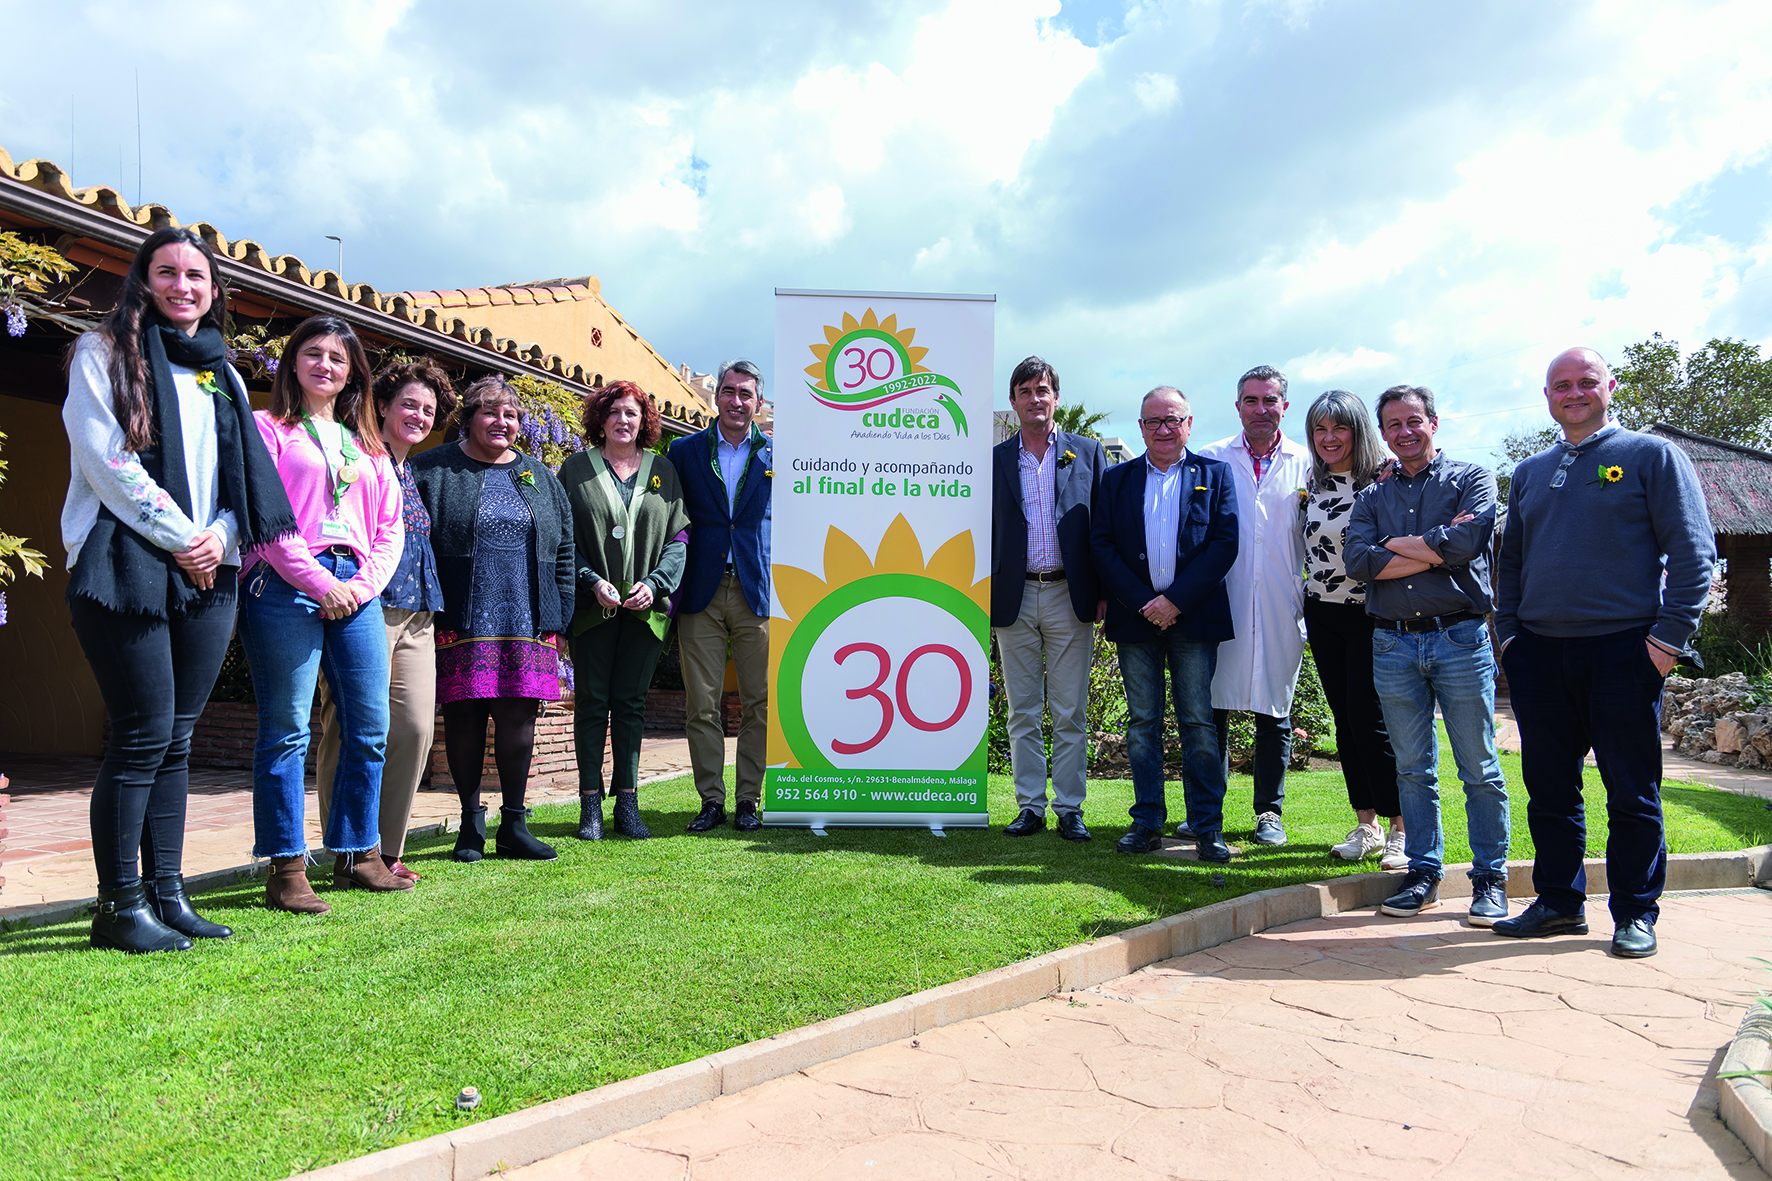 Cudeca Hospice – 30 years adding life to days, that’s a lot of life!